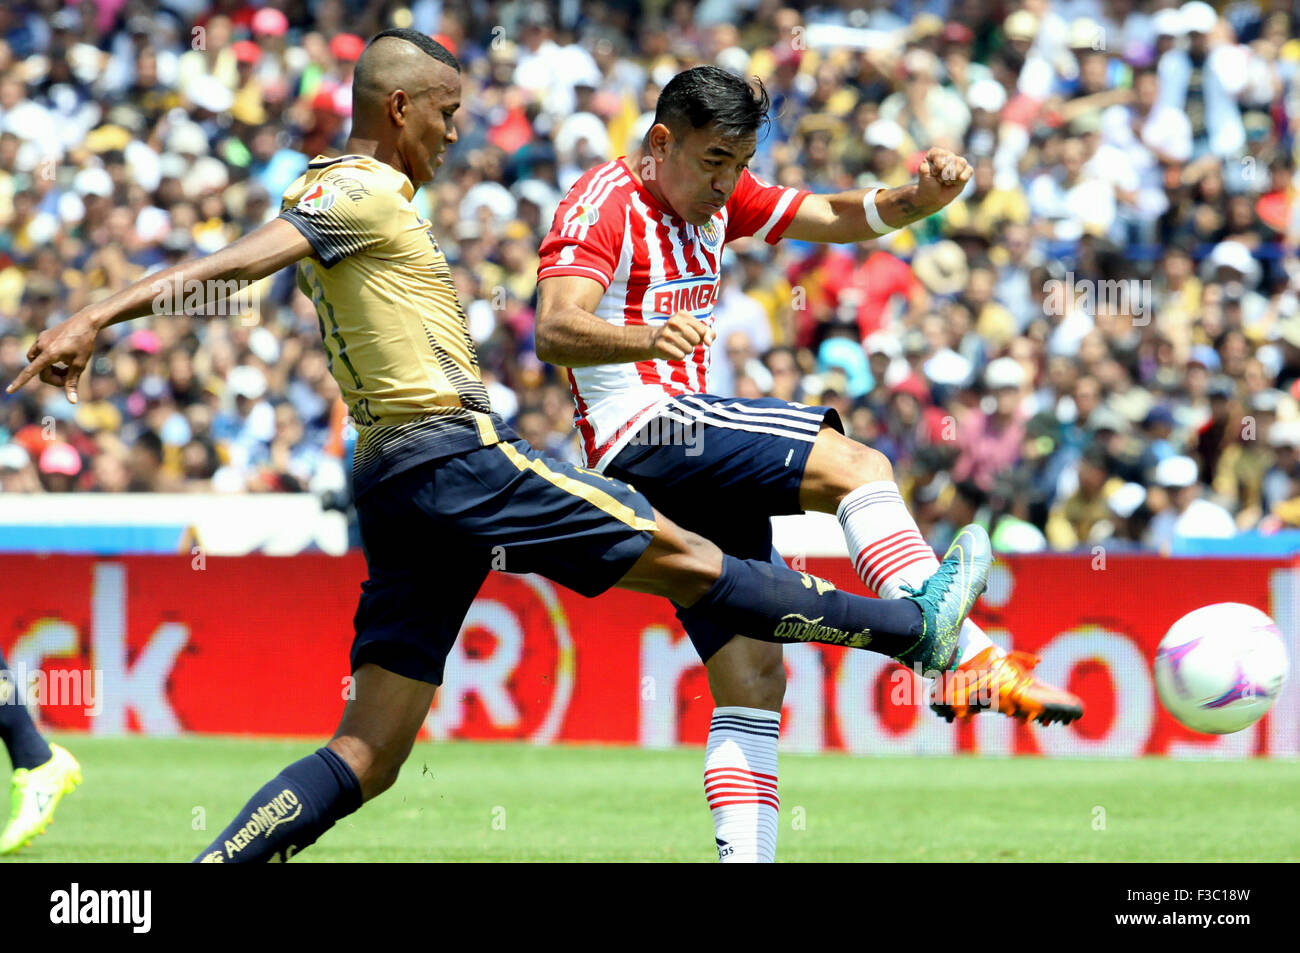 Mexico City, Mexico. 4th Oct, 2015. Pumas del UNAM's Fidel Martinez (L) vies with Chivas' Marco Fabian during the 2015 MX League match held in the University Olympic Stadium, in Mexico City, capital of Mexico, on Oct. 4, 2015. Pumas won by 1-0. © Adriana Perez/Xinhua/Alamy Live News Stock Photo